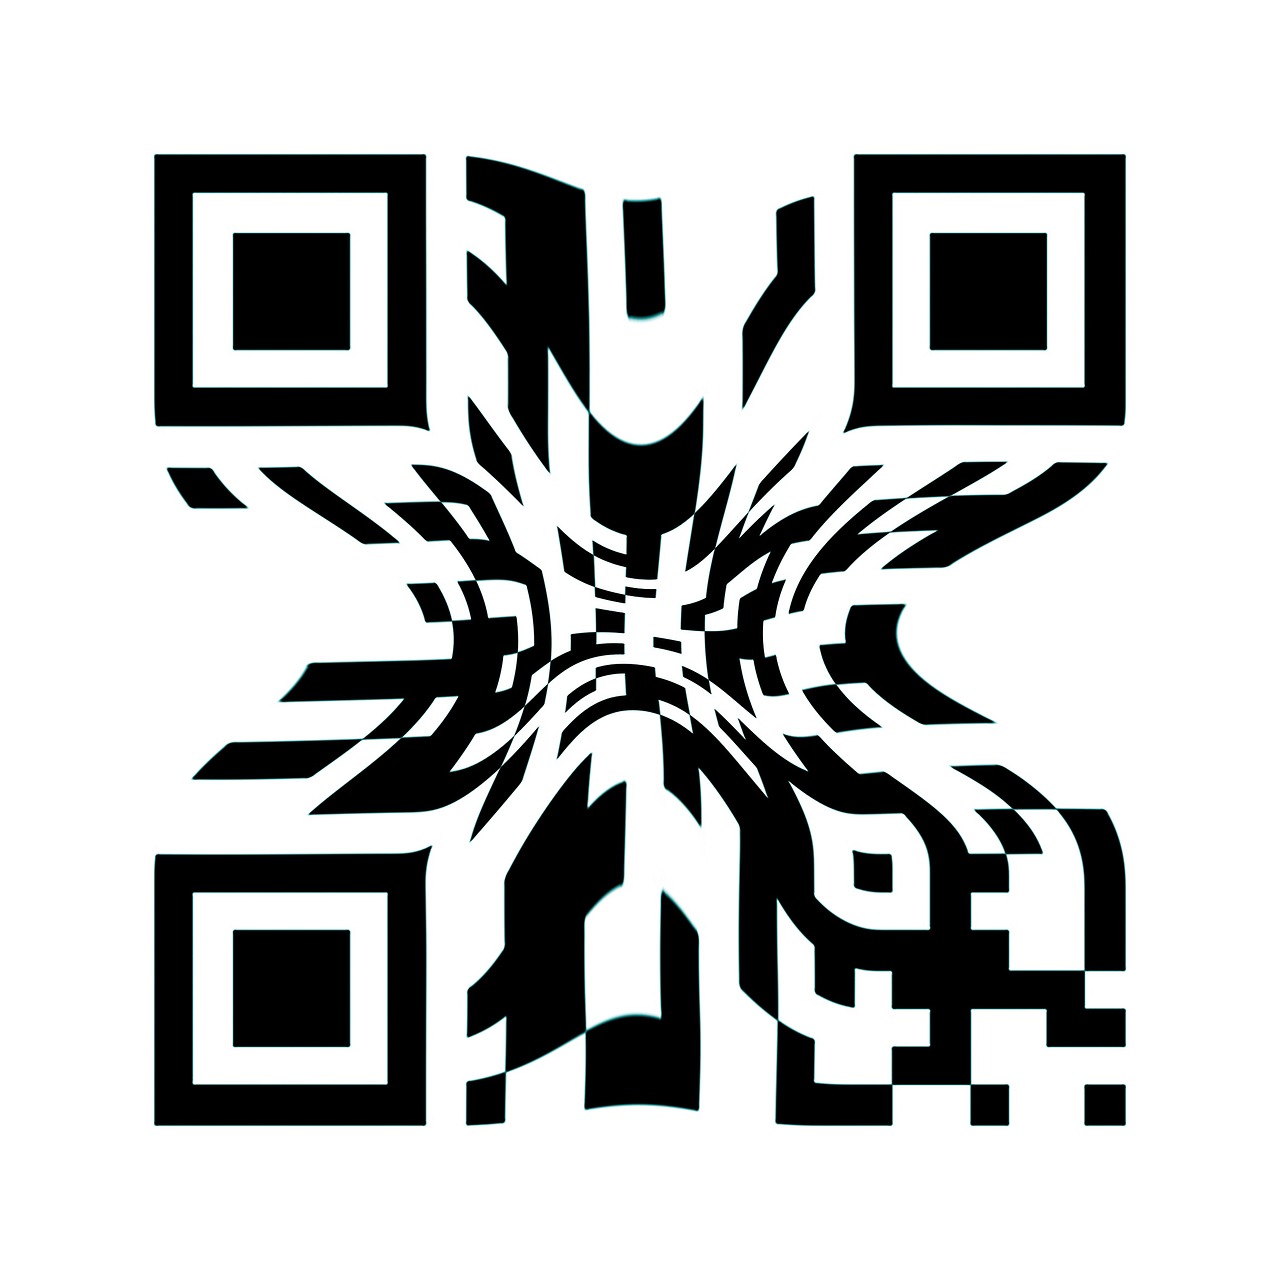 qr-code-bar-code-code-free-pictures-free-photos-free-image-from-needpix